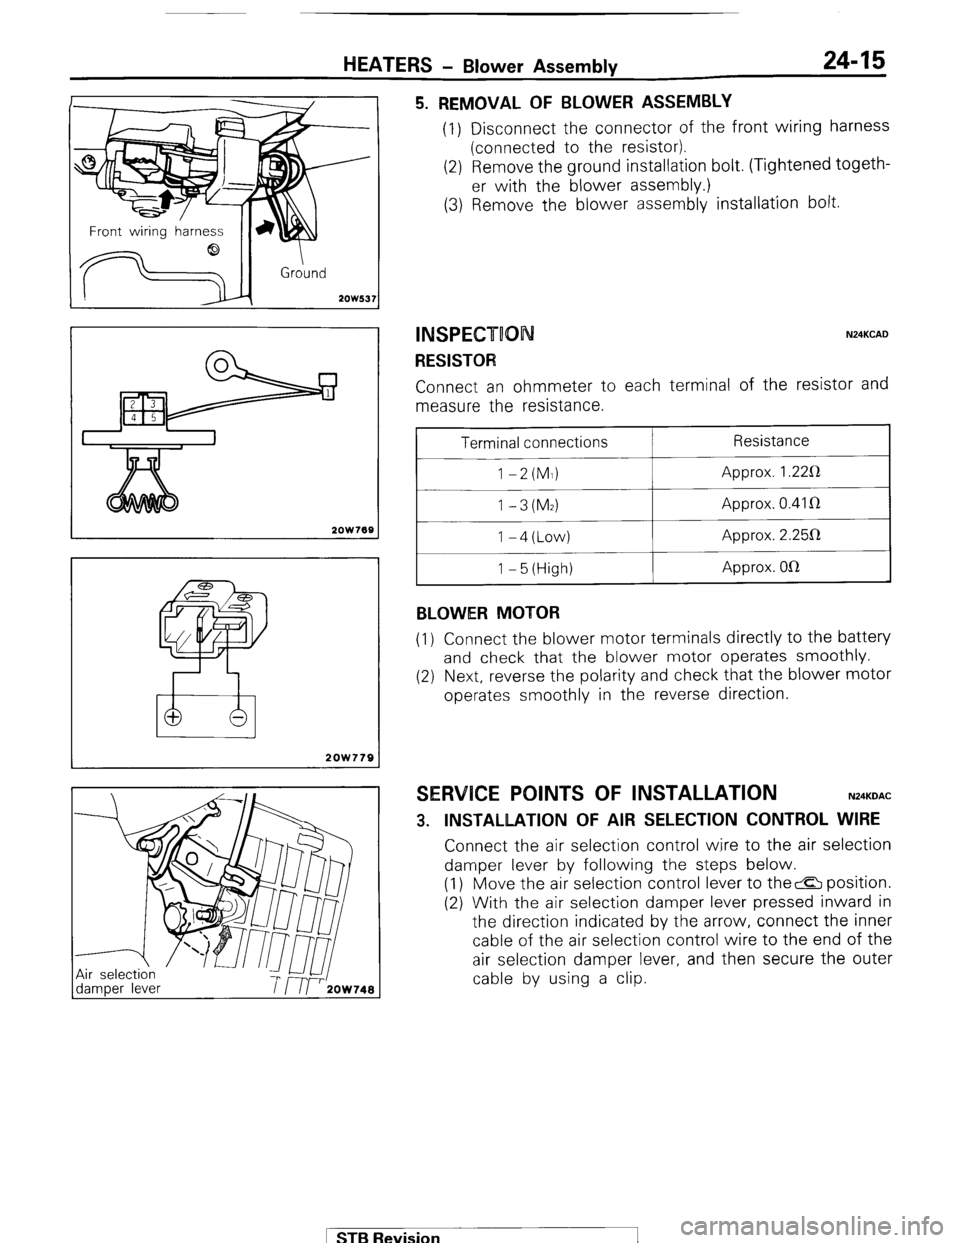 MITSUBISHI MONTERO 1987 1.G Workshop Manual HEATERS - Blower Assembly 24-15 
--I 
Front wirina harness 
d 
! 
2OW537 
2OW768 
2OW779 
5. REMOVAL OF BLOWER ASSEMBLY (1) Disconnect the connector of the front wiring harness 
(connected to the resi